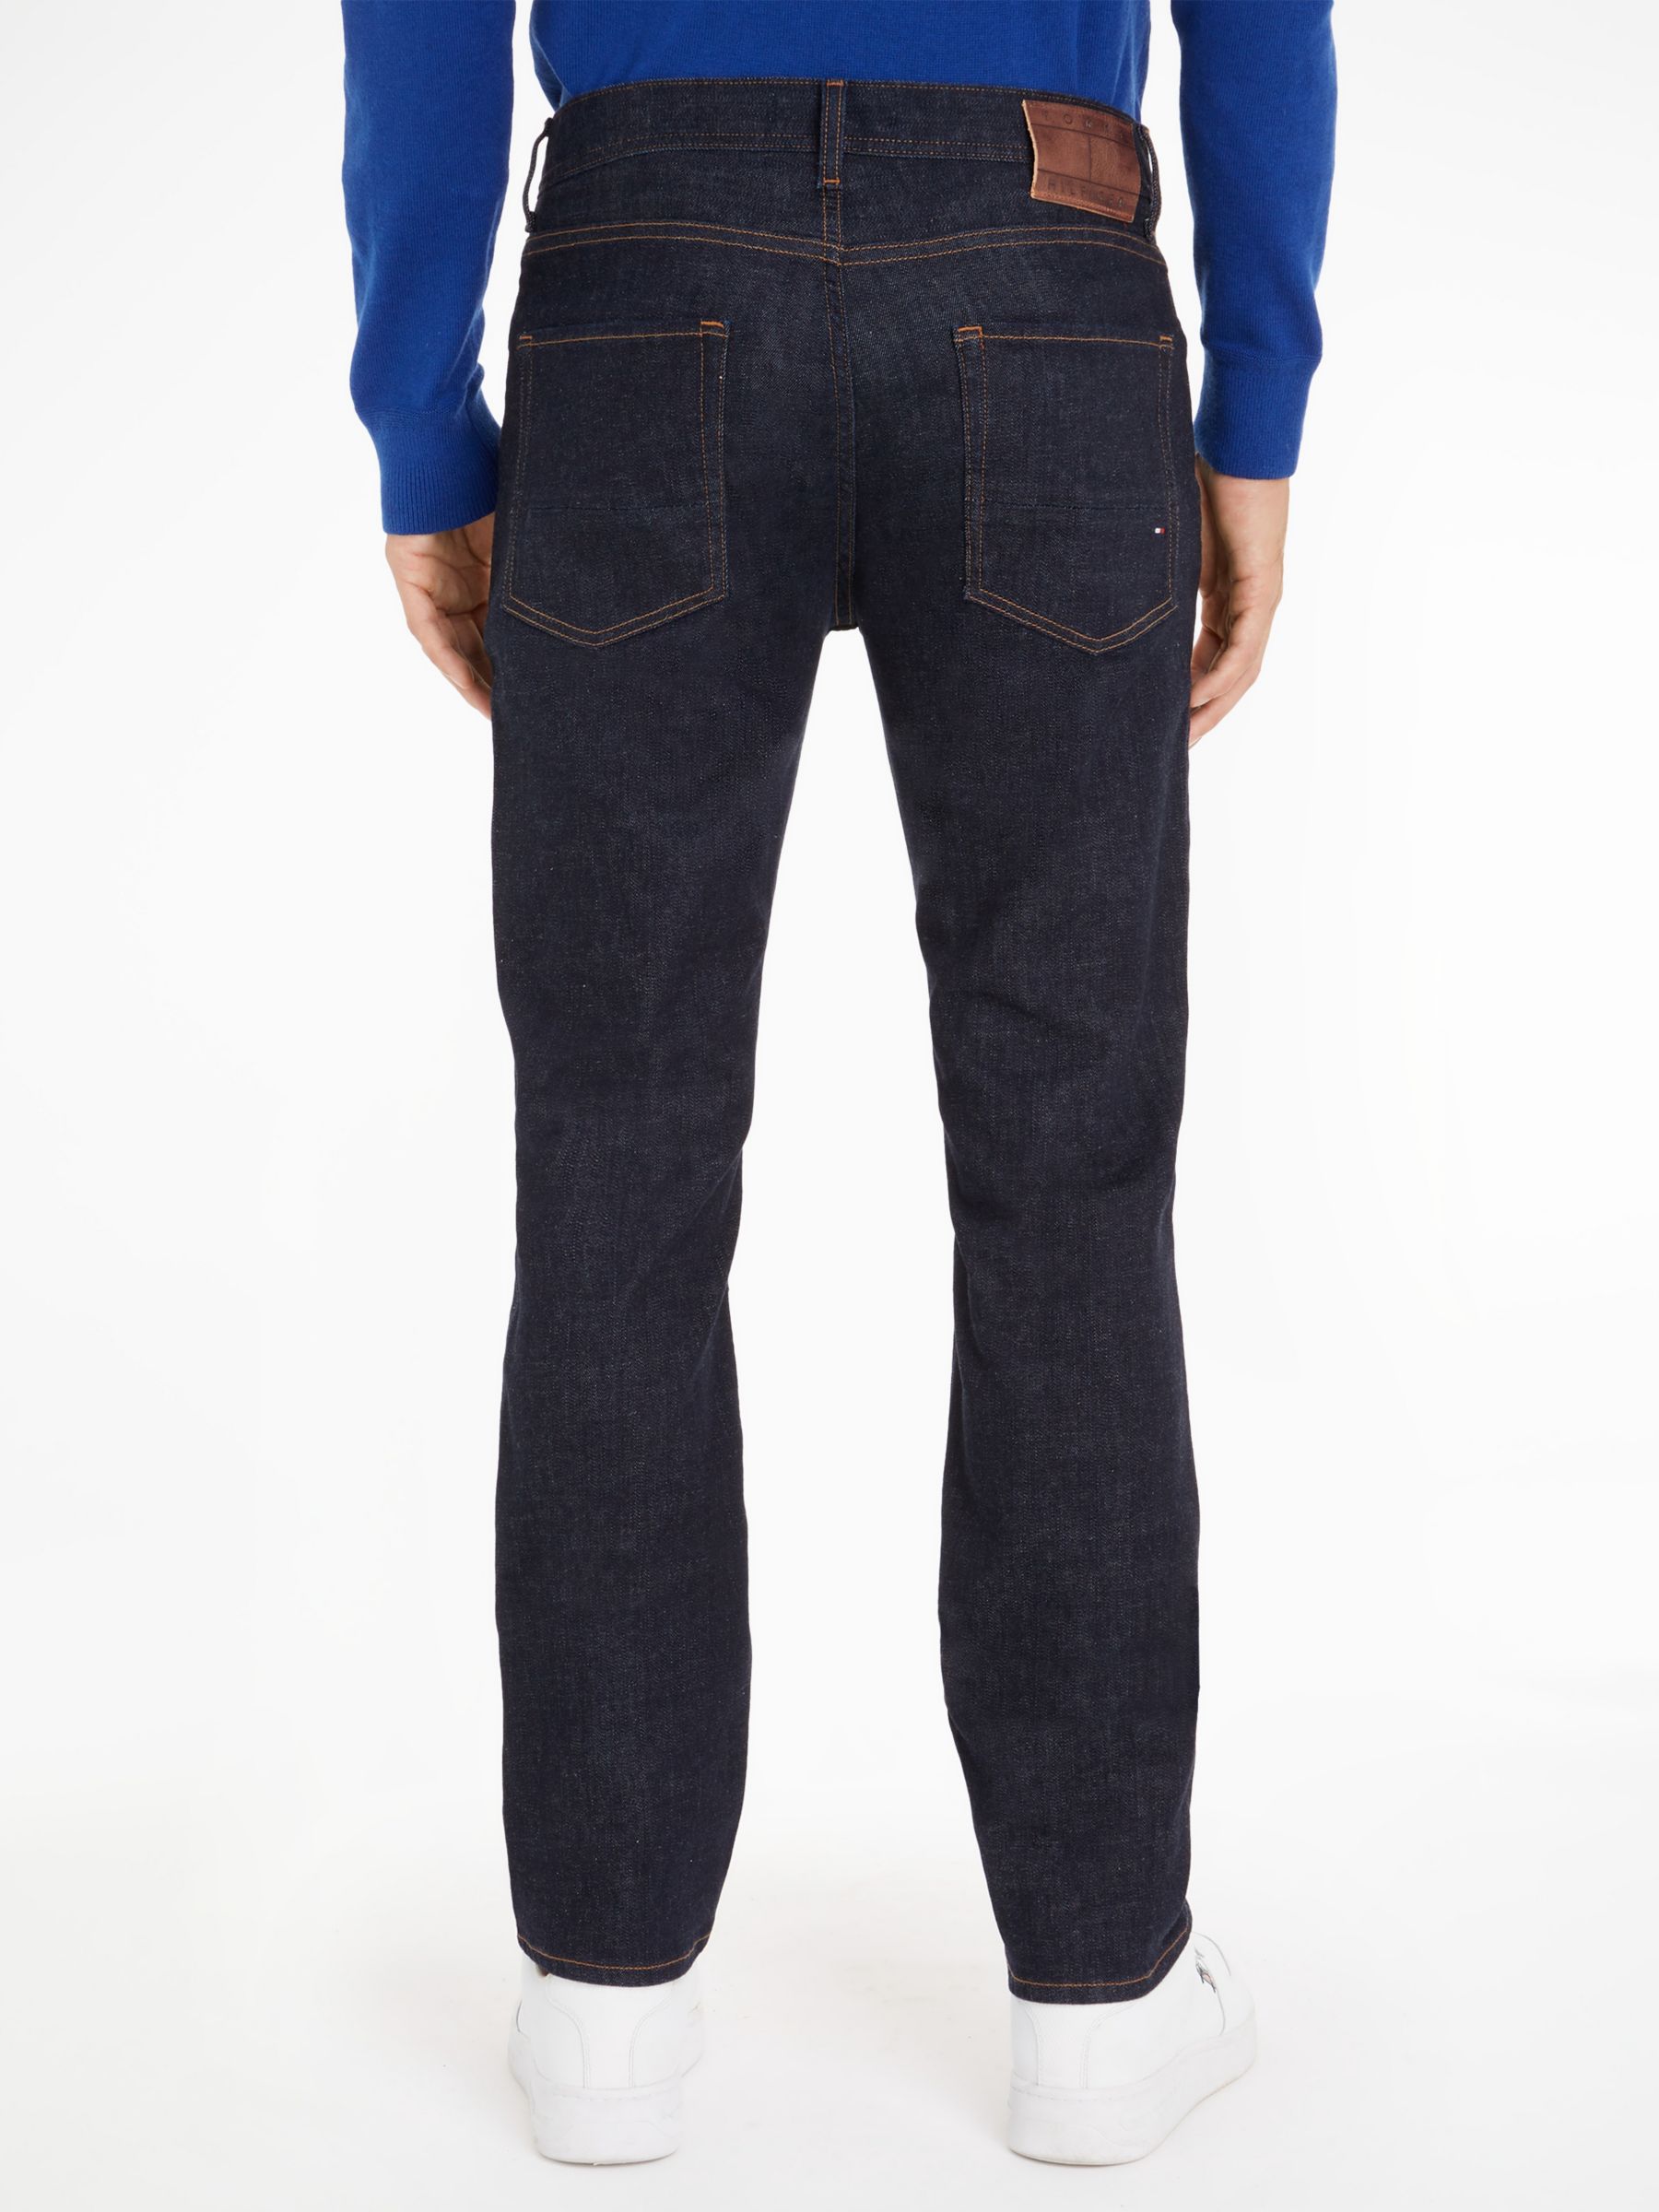 Tommy Hilfiger Mens Straight Fit Jeans (34X32, Rinse) : :  Clothing, Shoes & Accessories